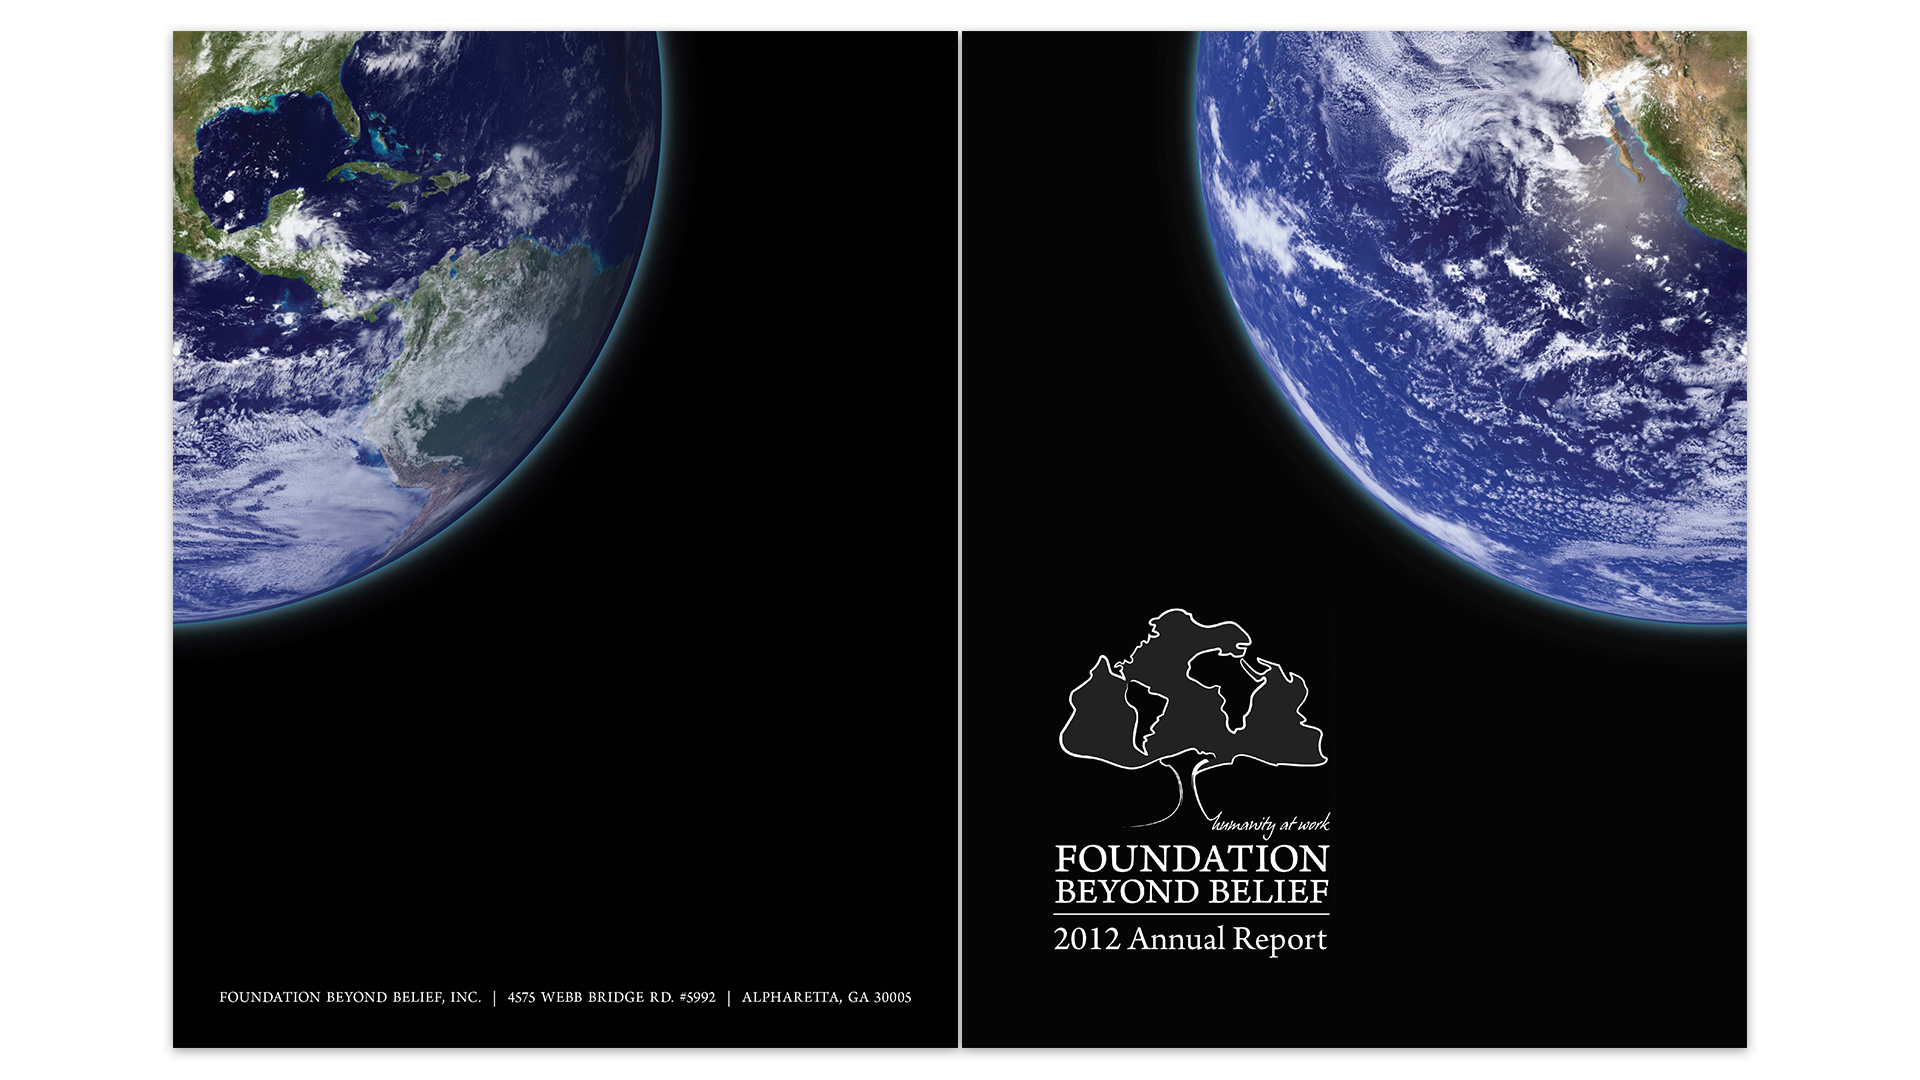 Foundation Beyond Belief’s 2012 Annual Report